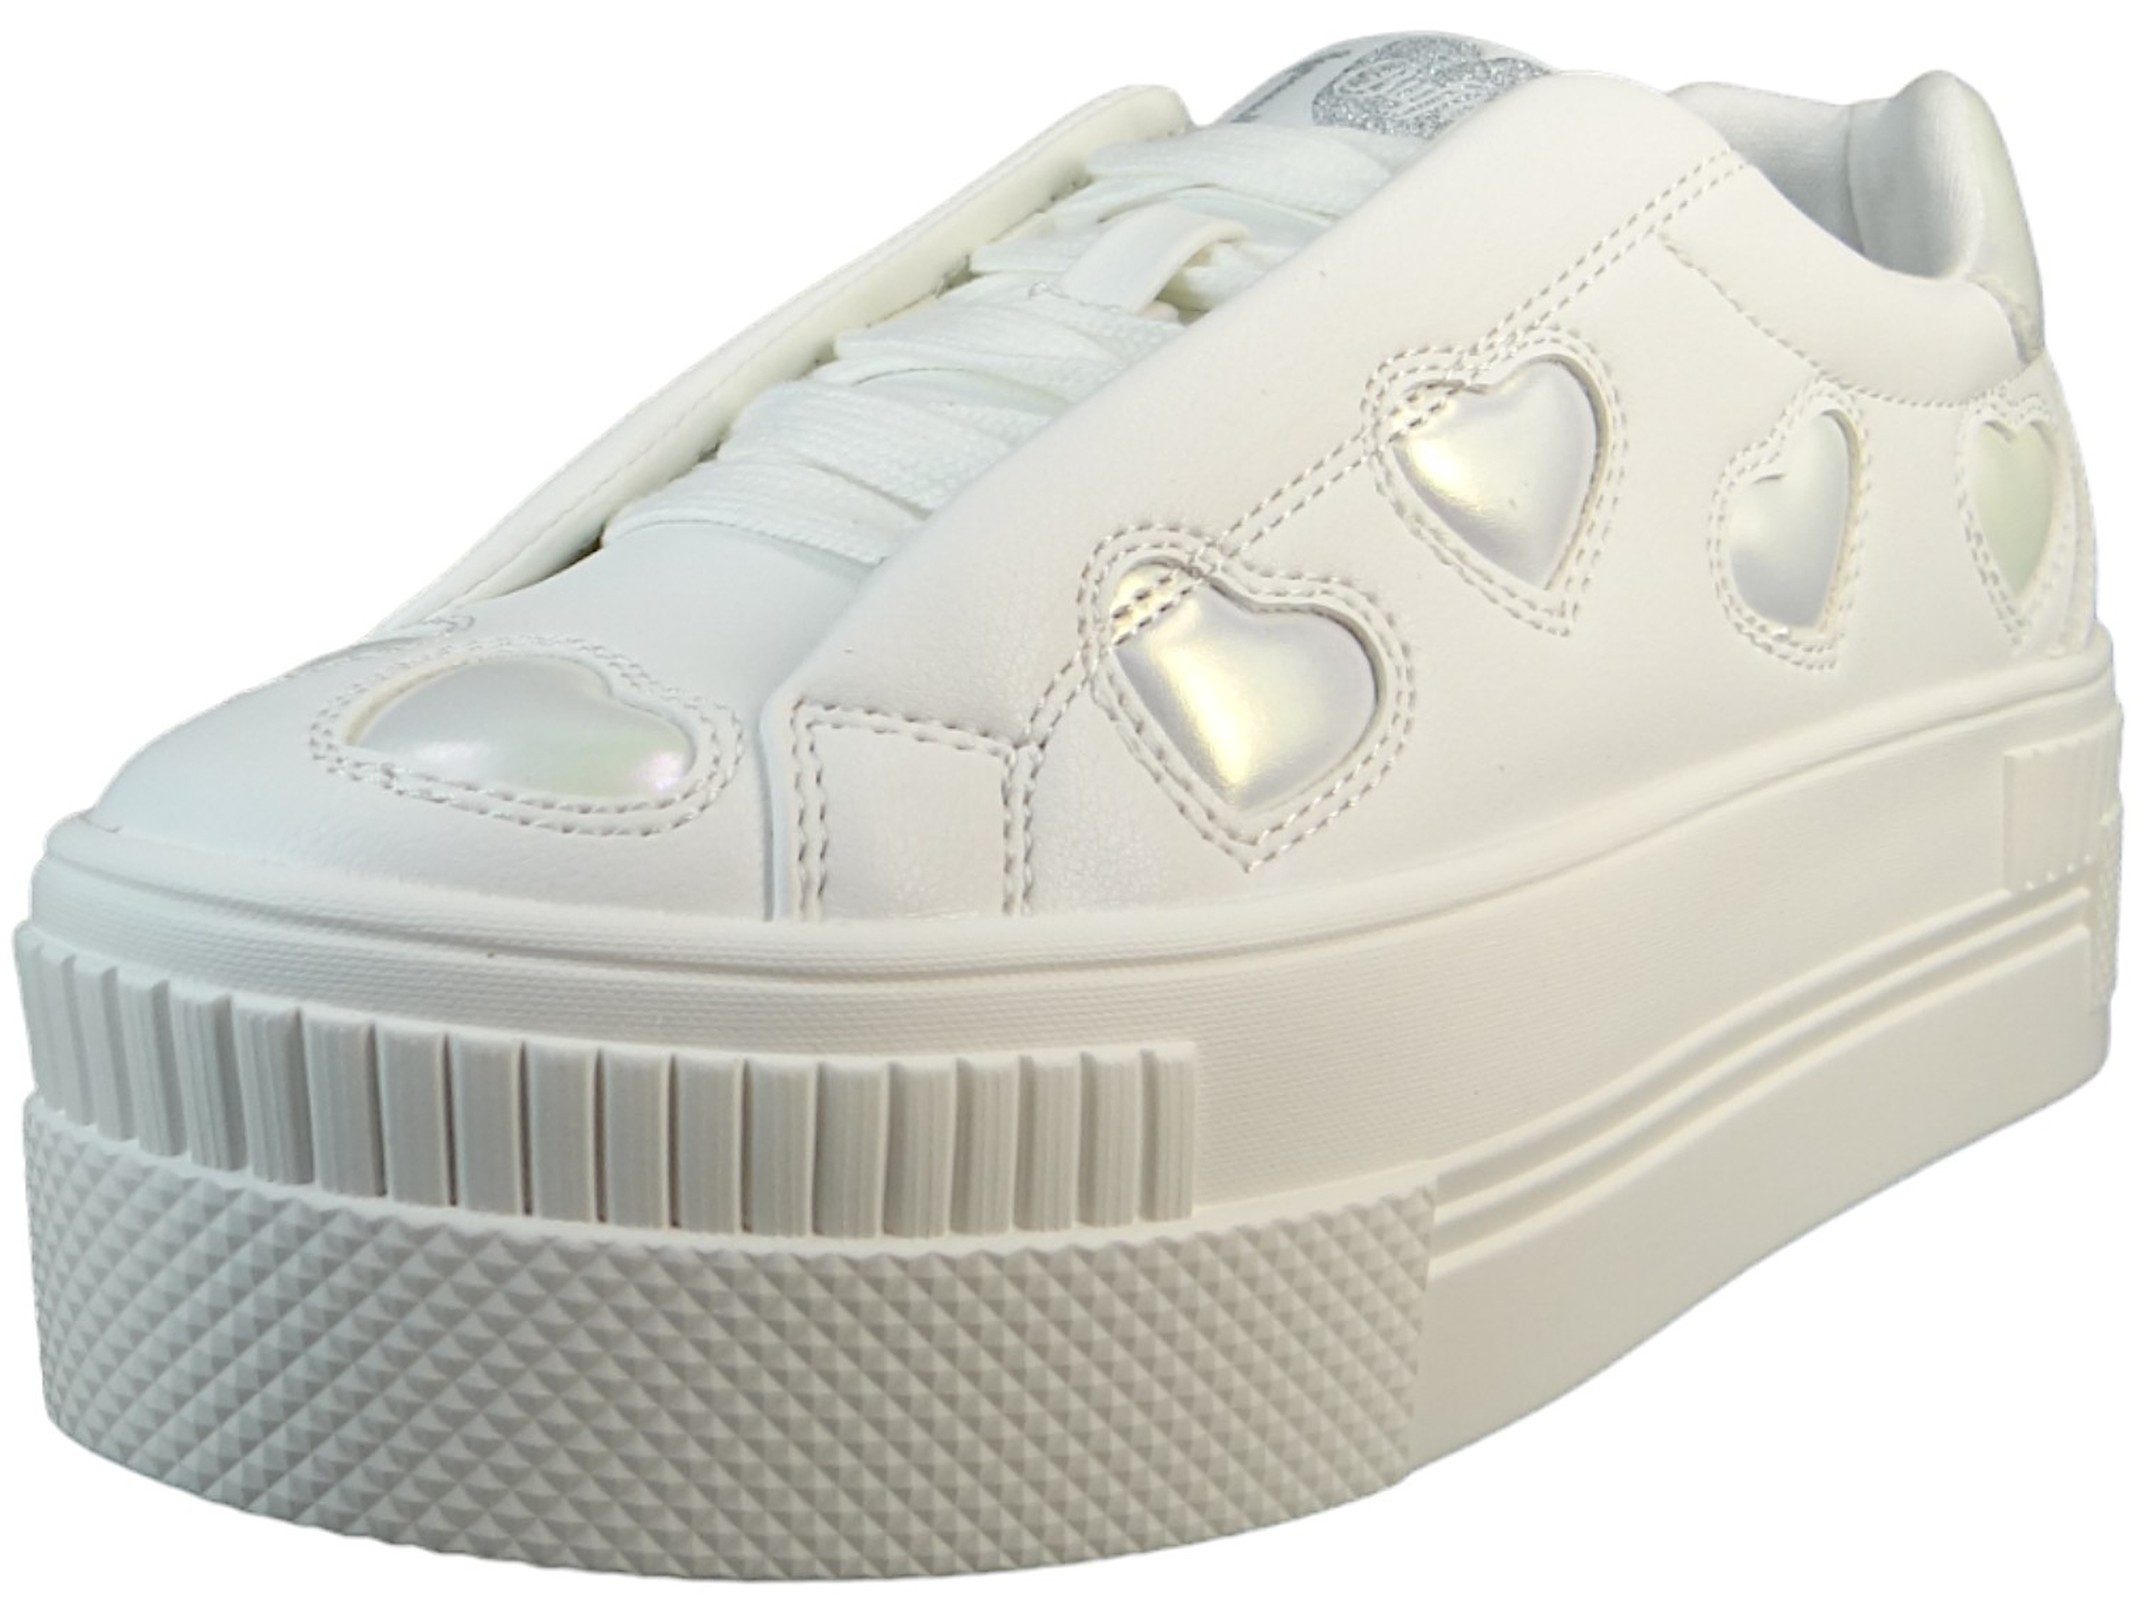 Buffalo 1636160 Paired Bloom Low Top Hochzeit White Sneaker